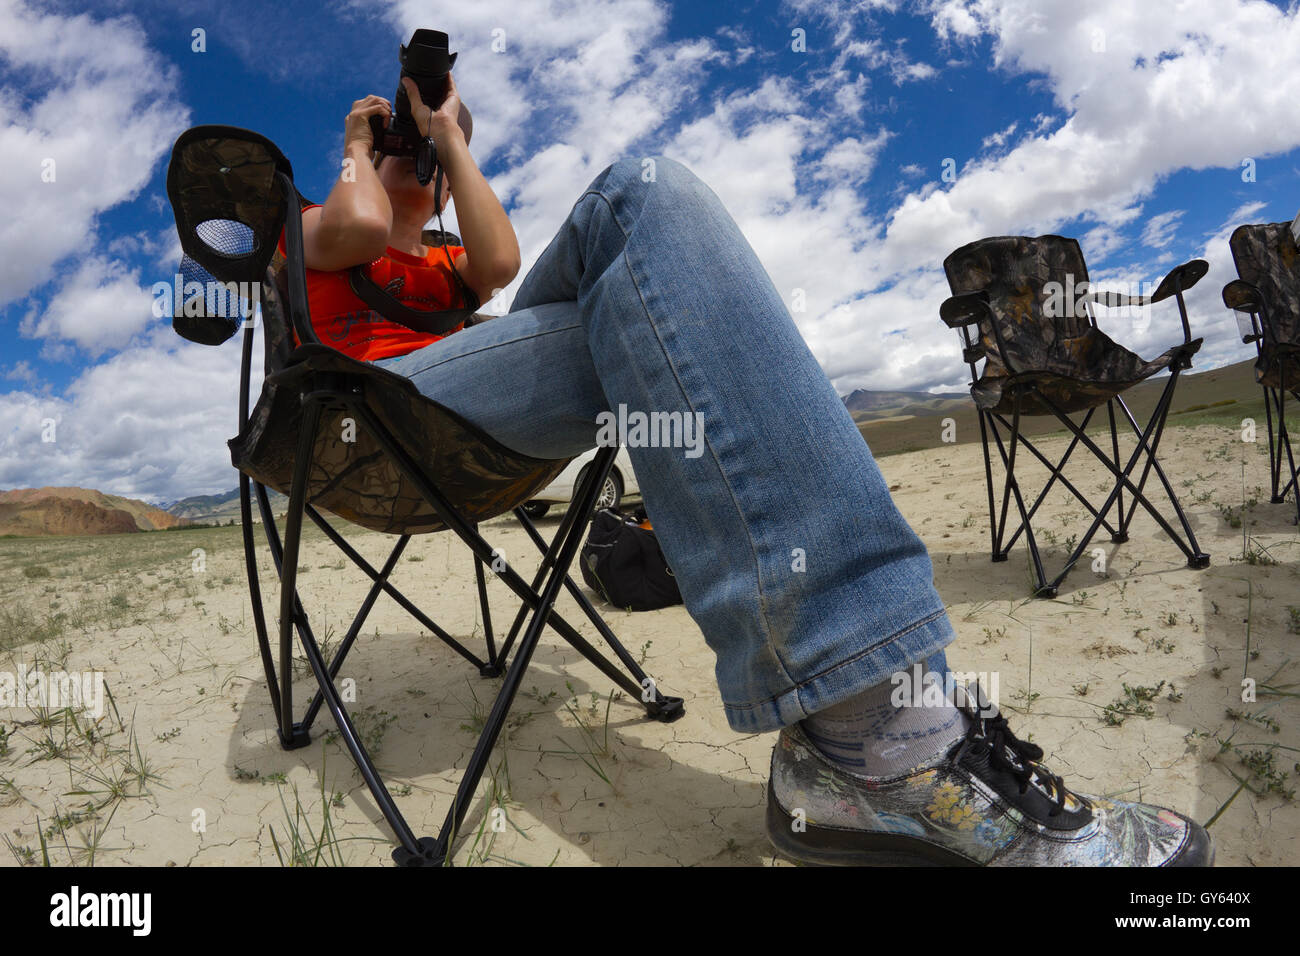 Portrait of young woman nature photographer taking landscape pictures in the desert area (Altai, Russia). Stock Photo